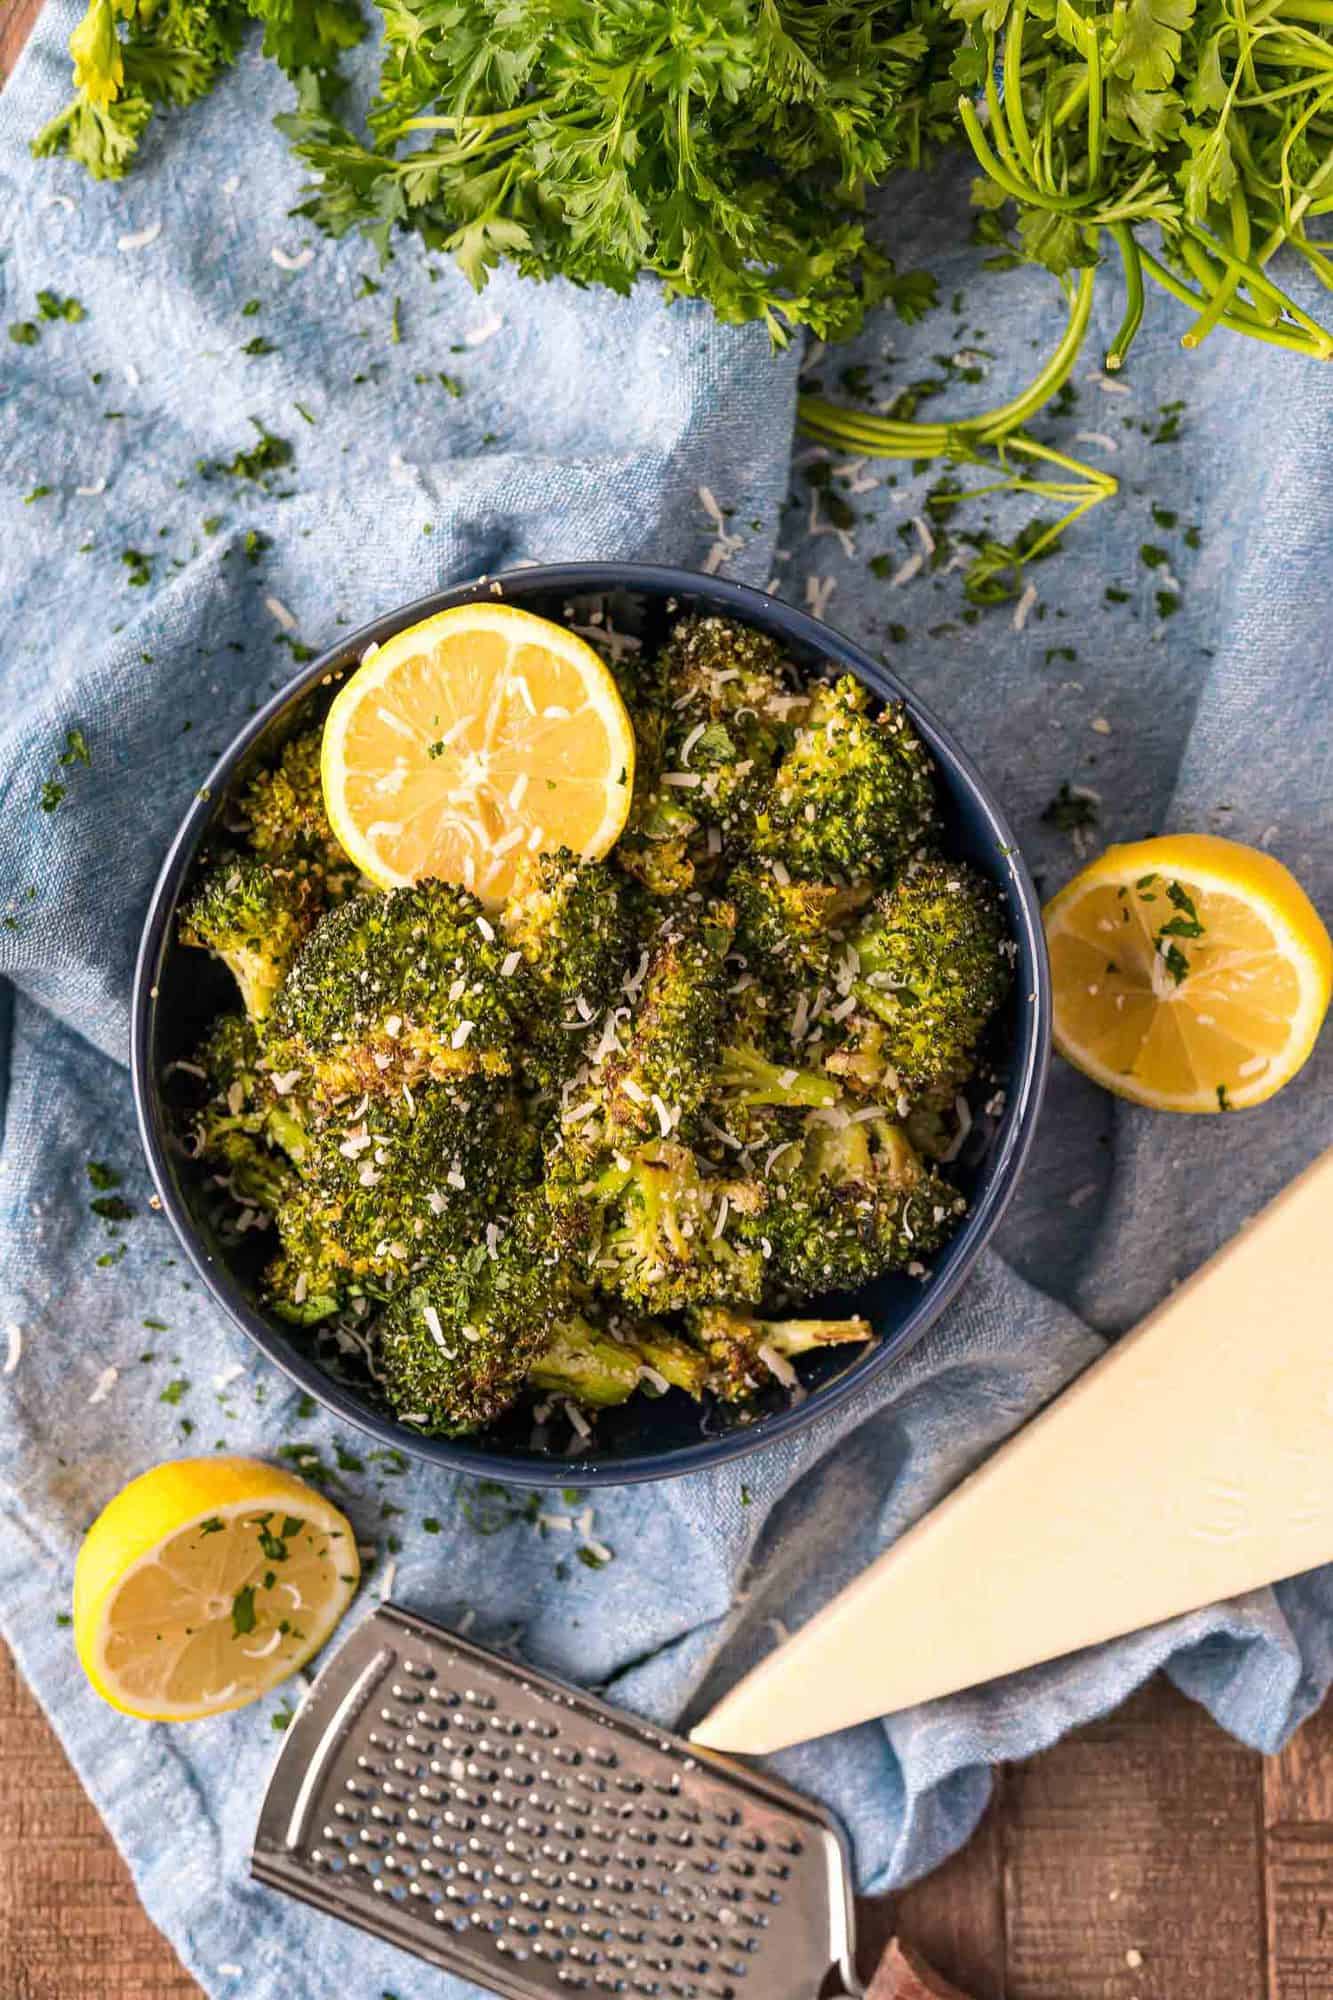 Roasted broccoli in black bowl, surrounded by lemons, cheese, parsley.